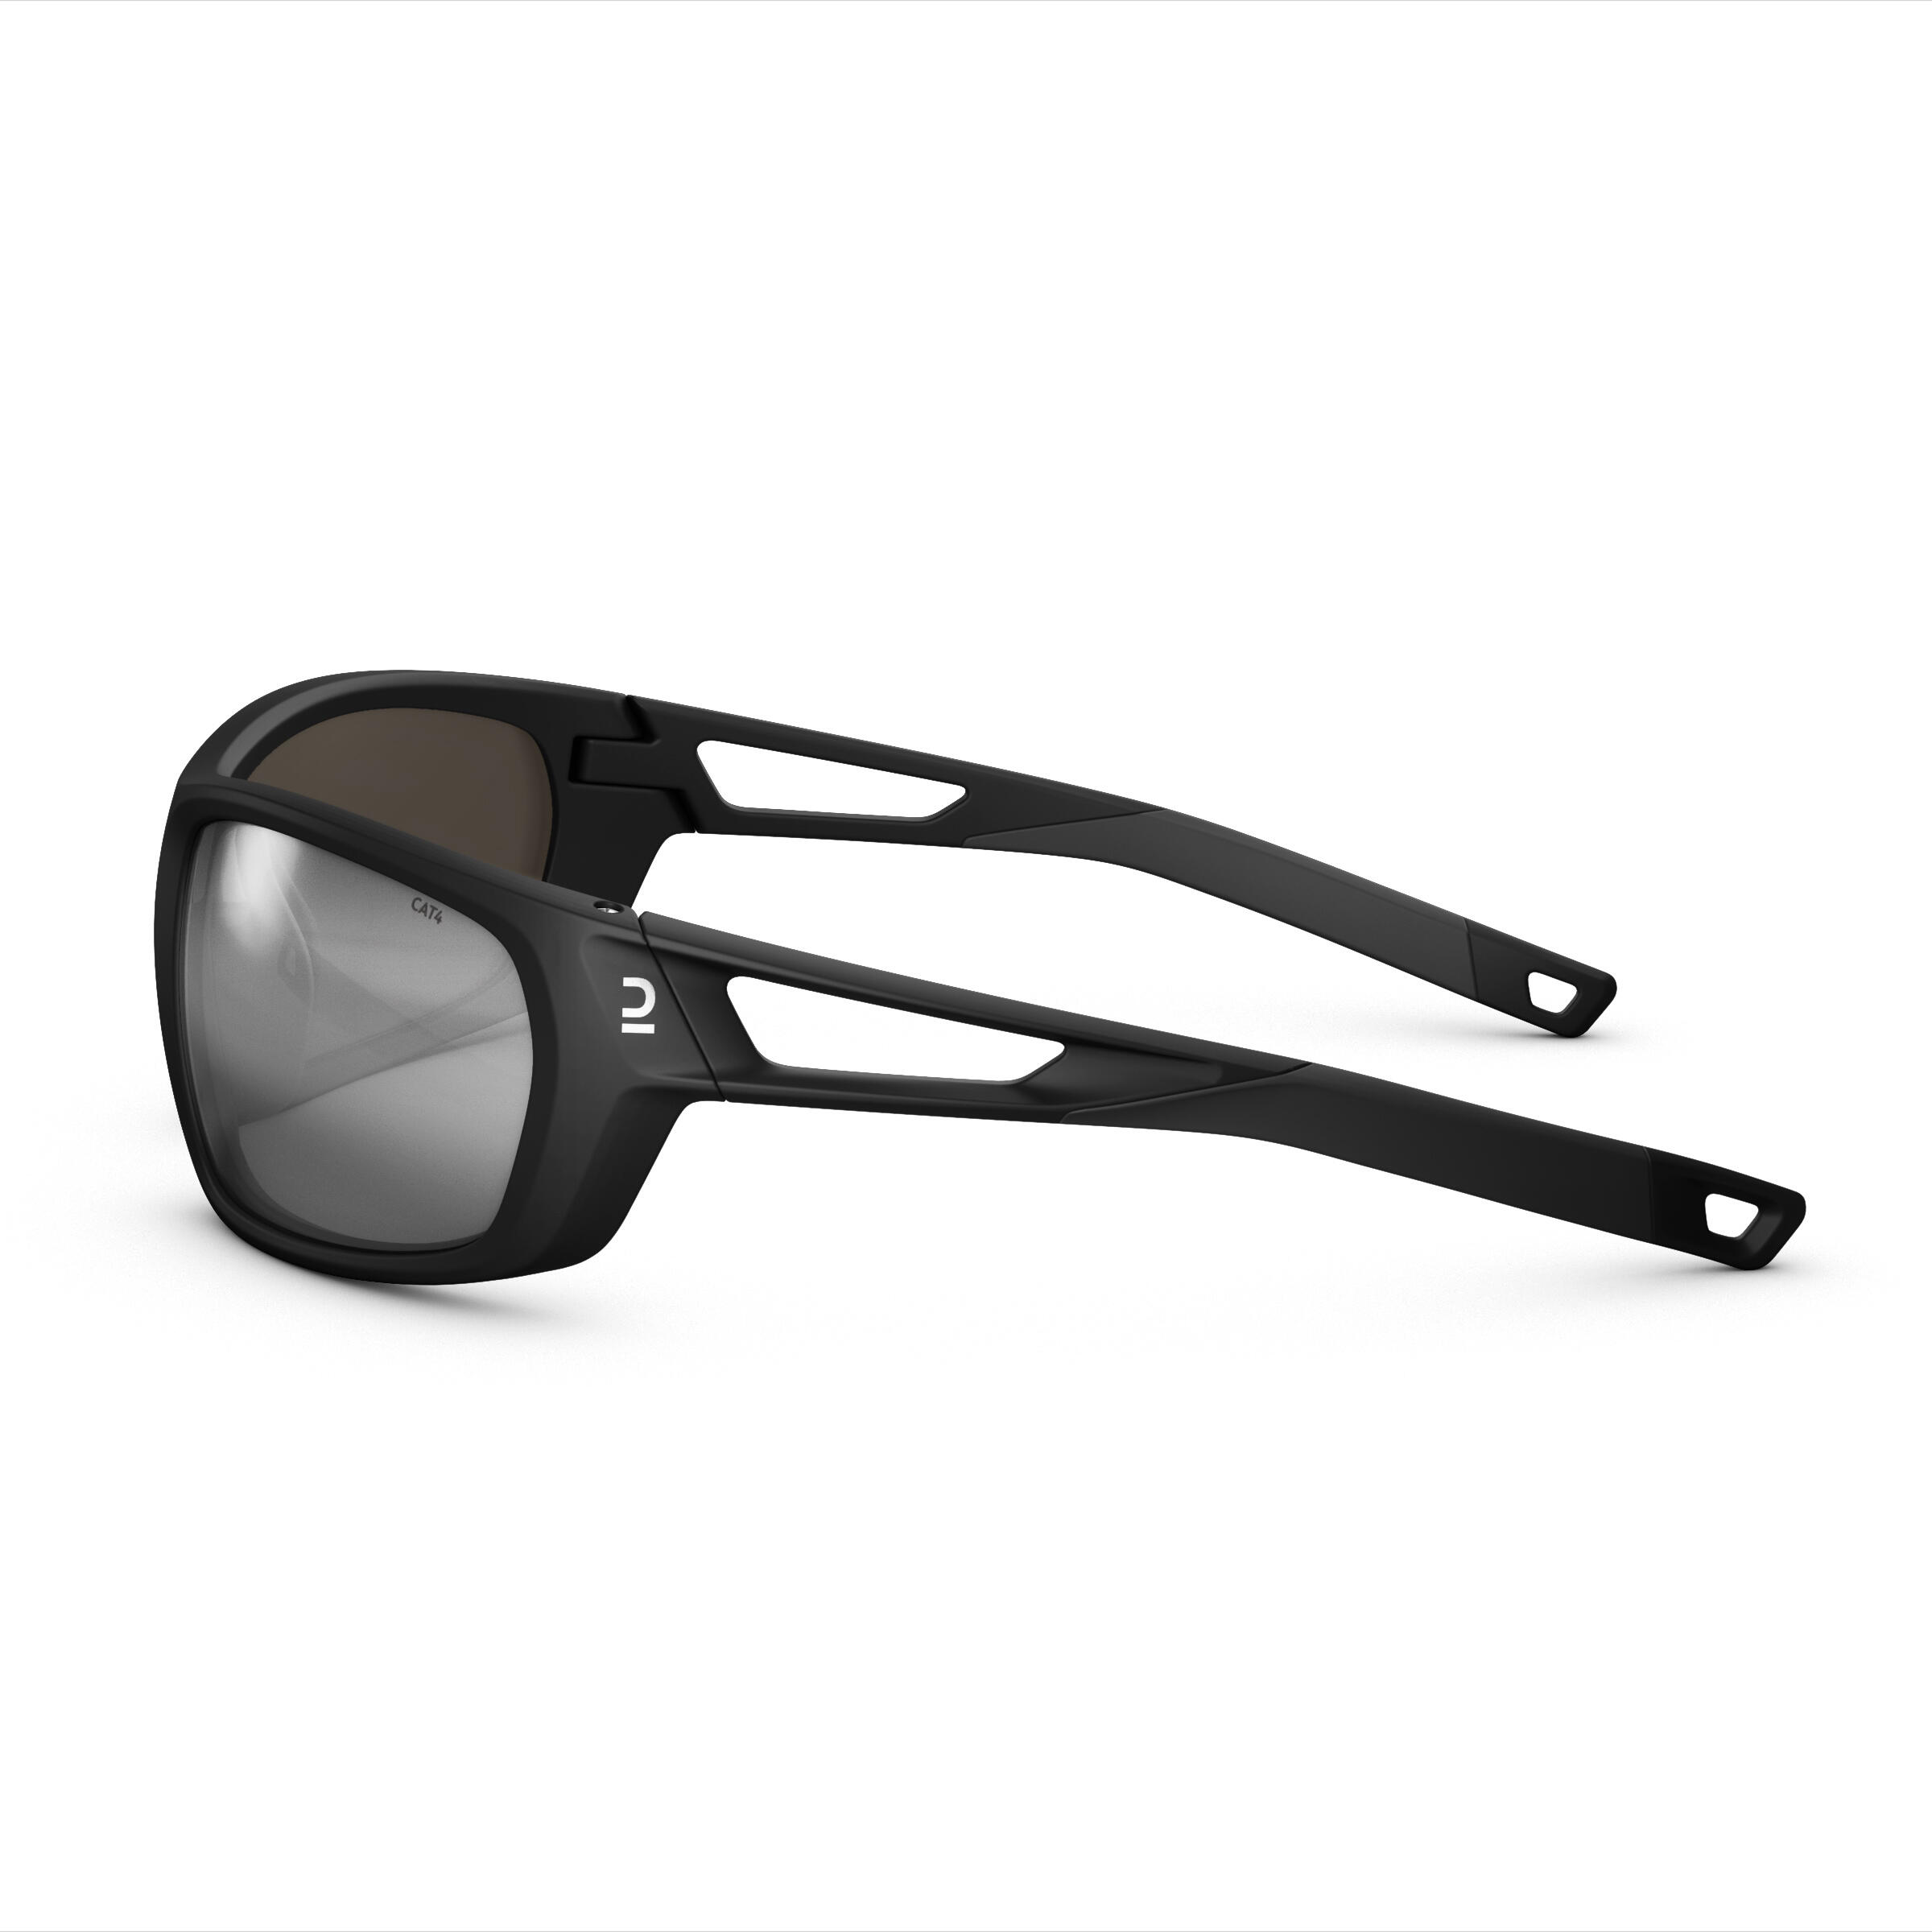 Hiking Category 4 Sunglasses - MH 580 Black/Silver - black, Carbon